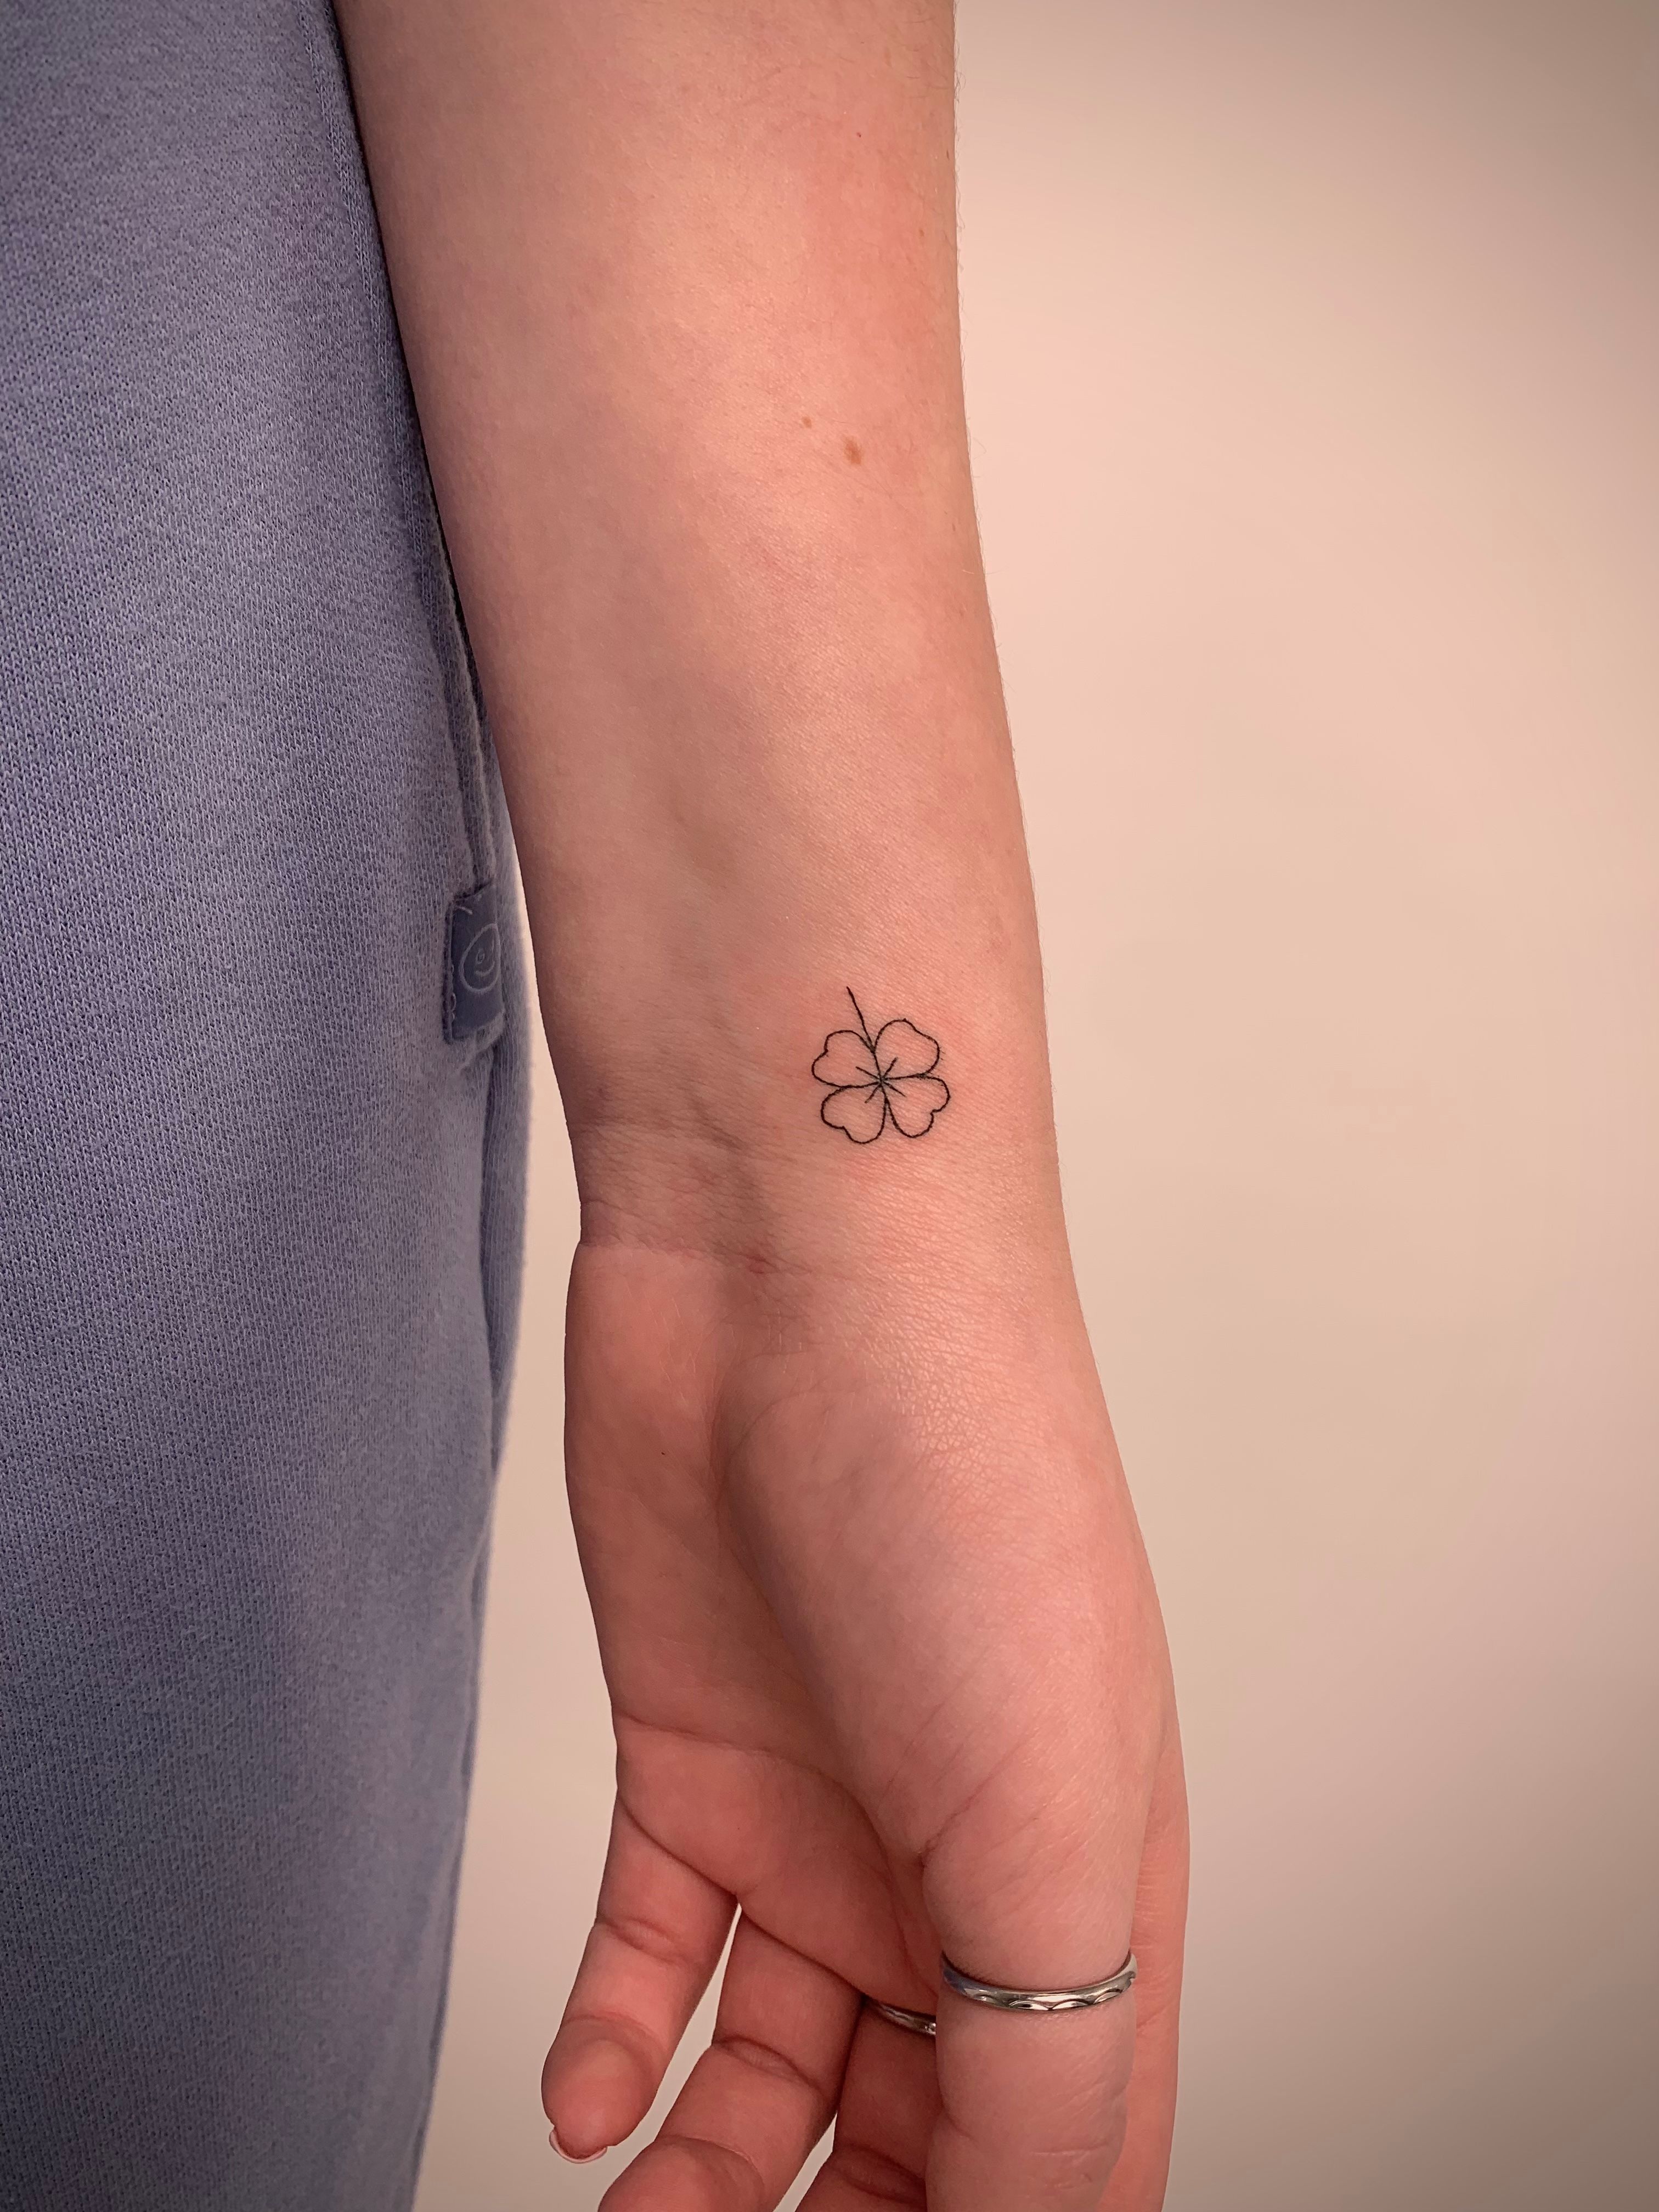 What does a shamrock tattoo mean? - Quora